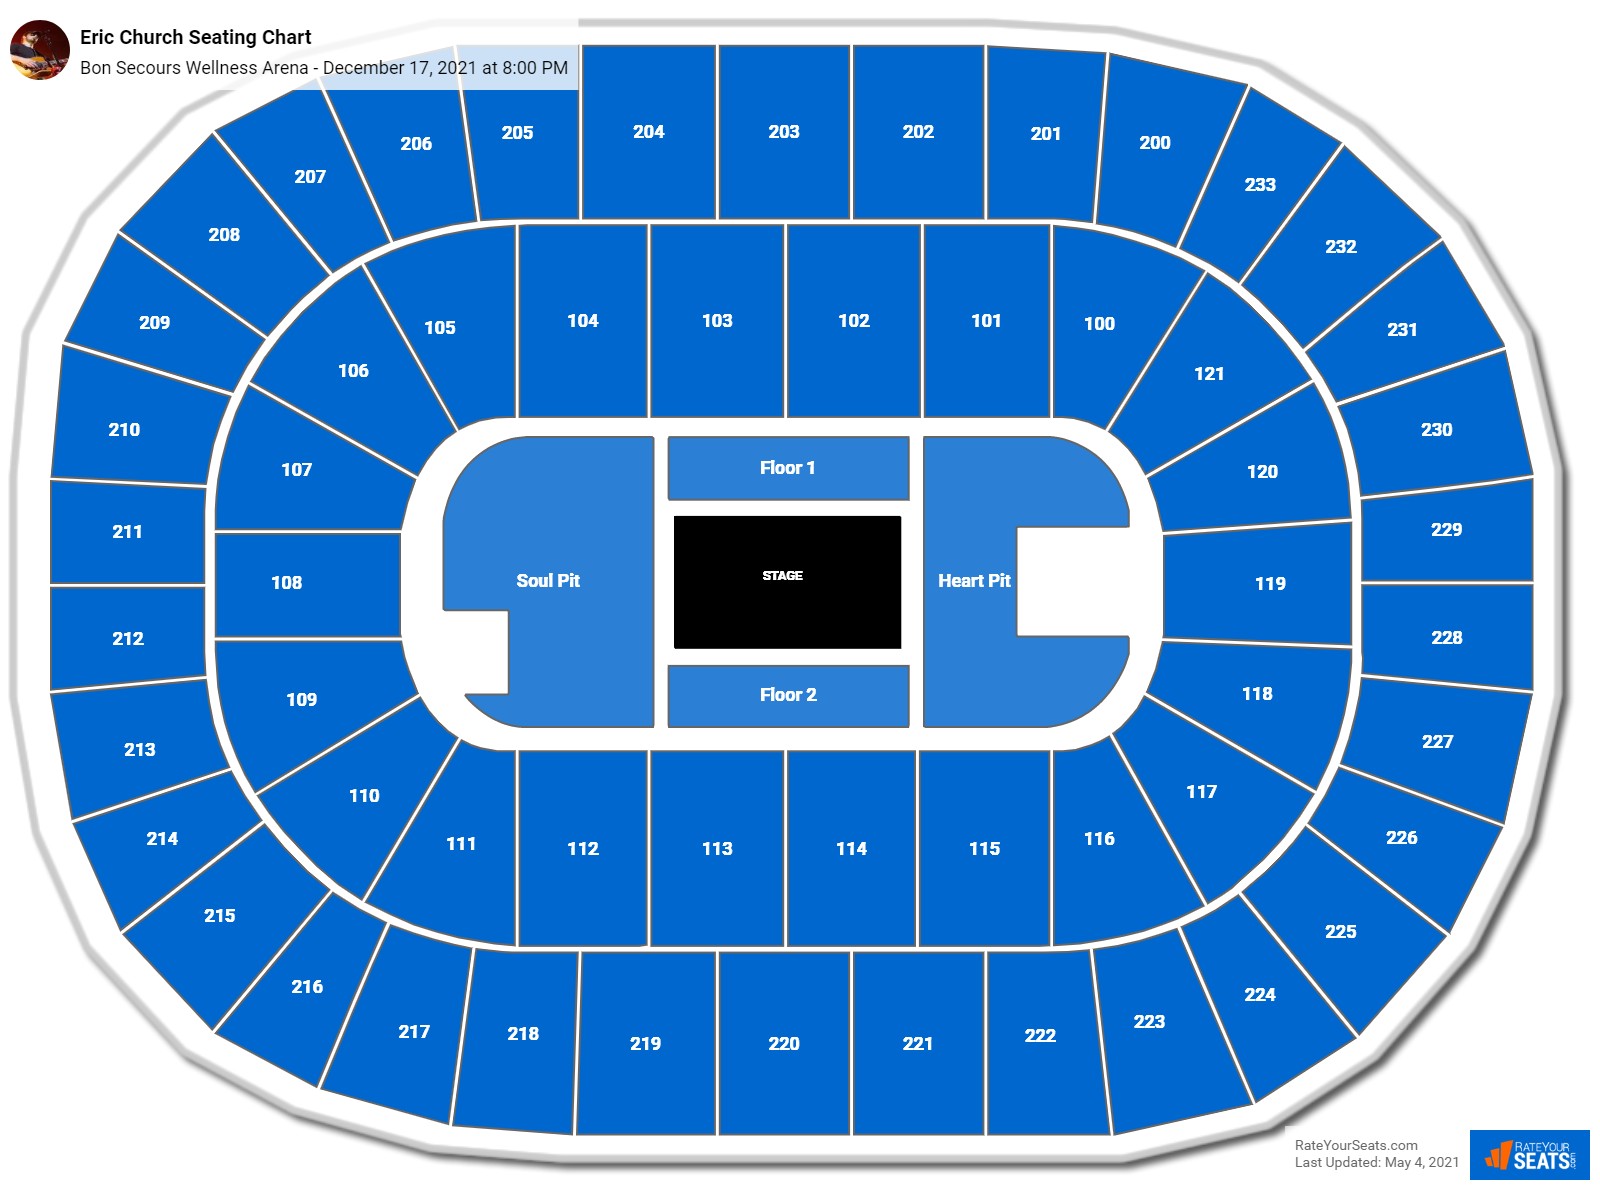 Bon Secours Wellness Arena Seating Charts For Concerts